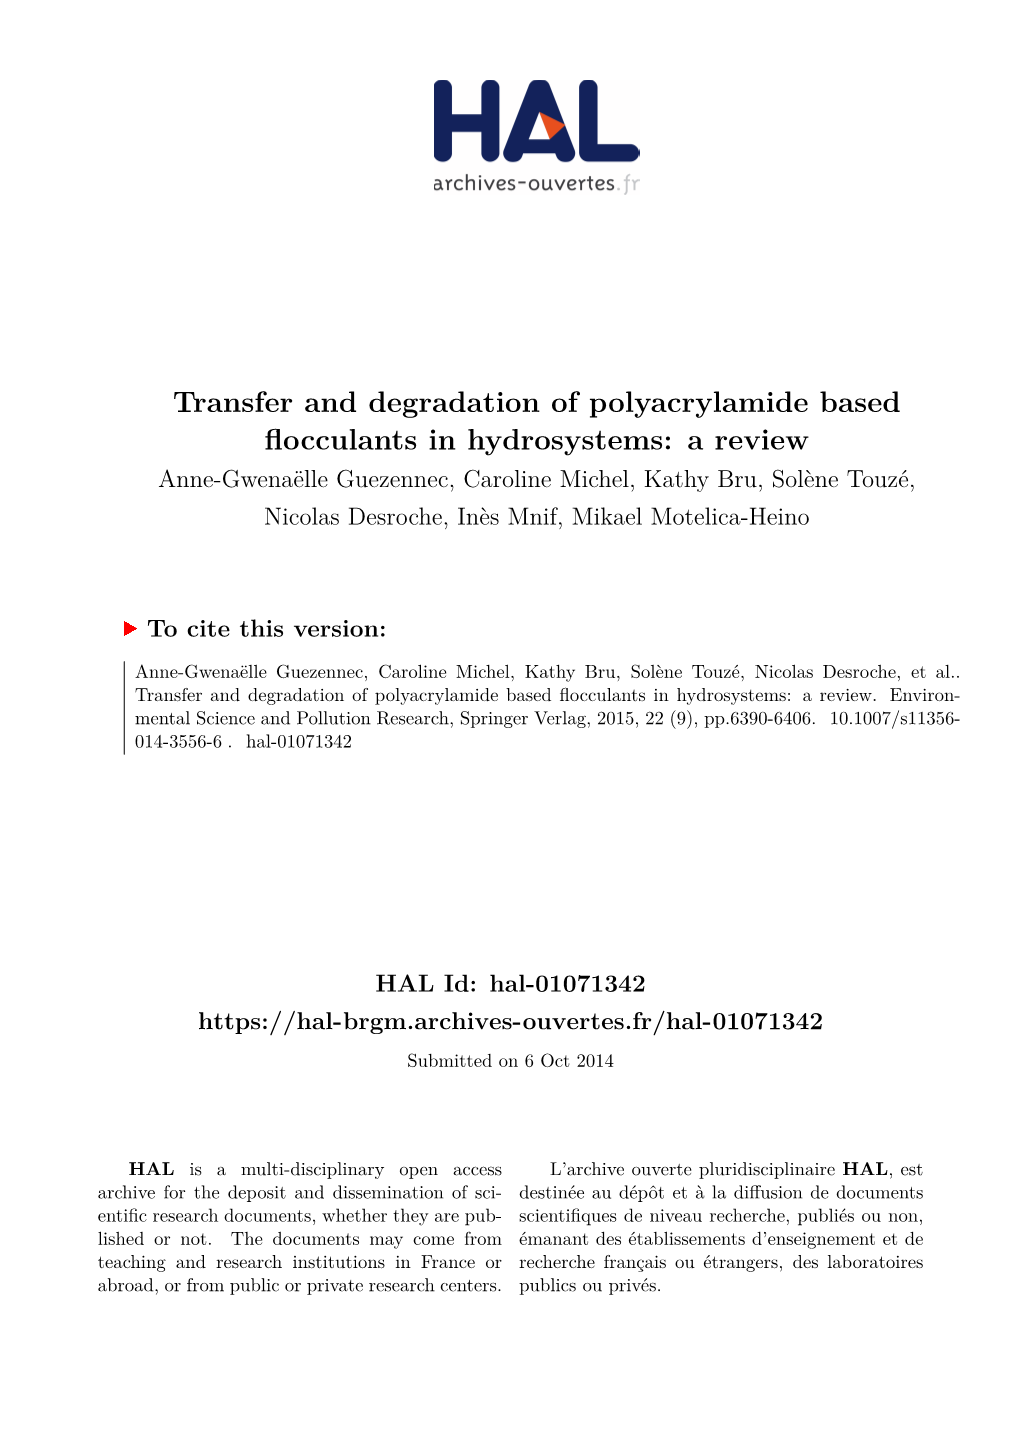 Transfer and Degradation of Polyacrylamide Based Flocculants In